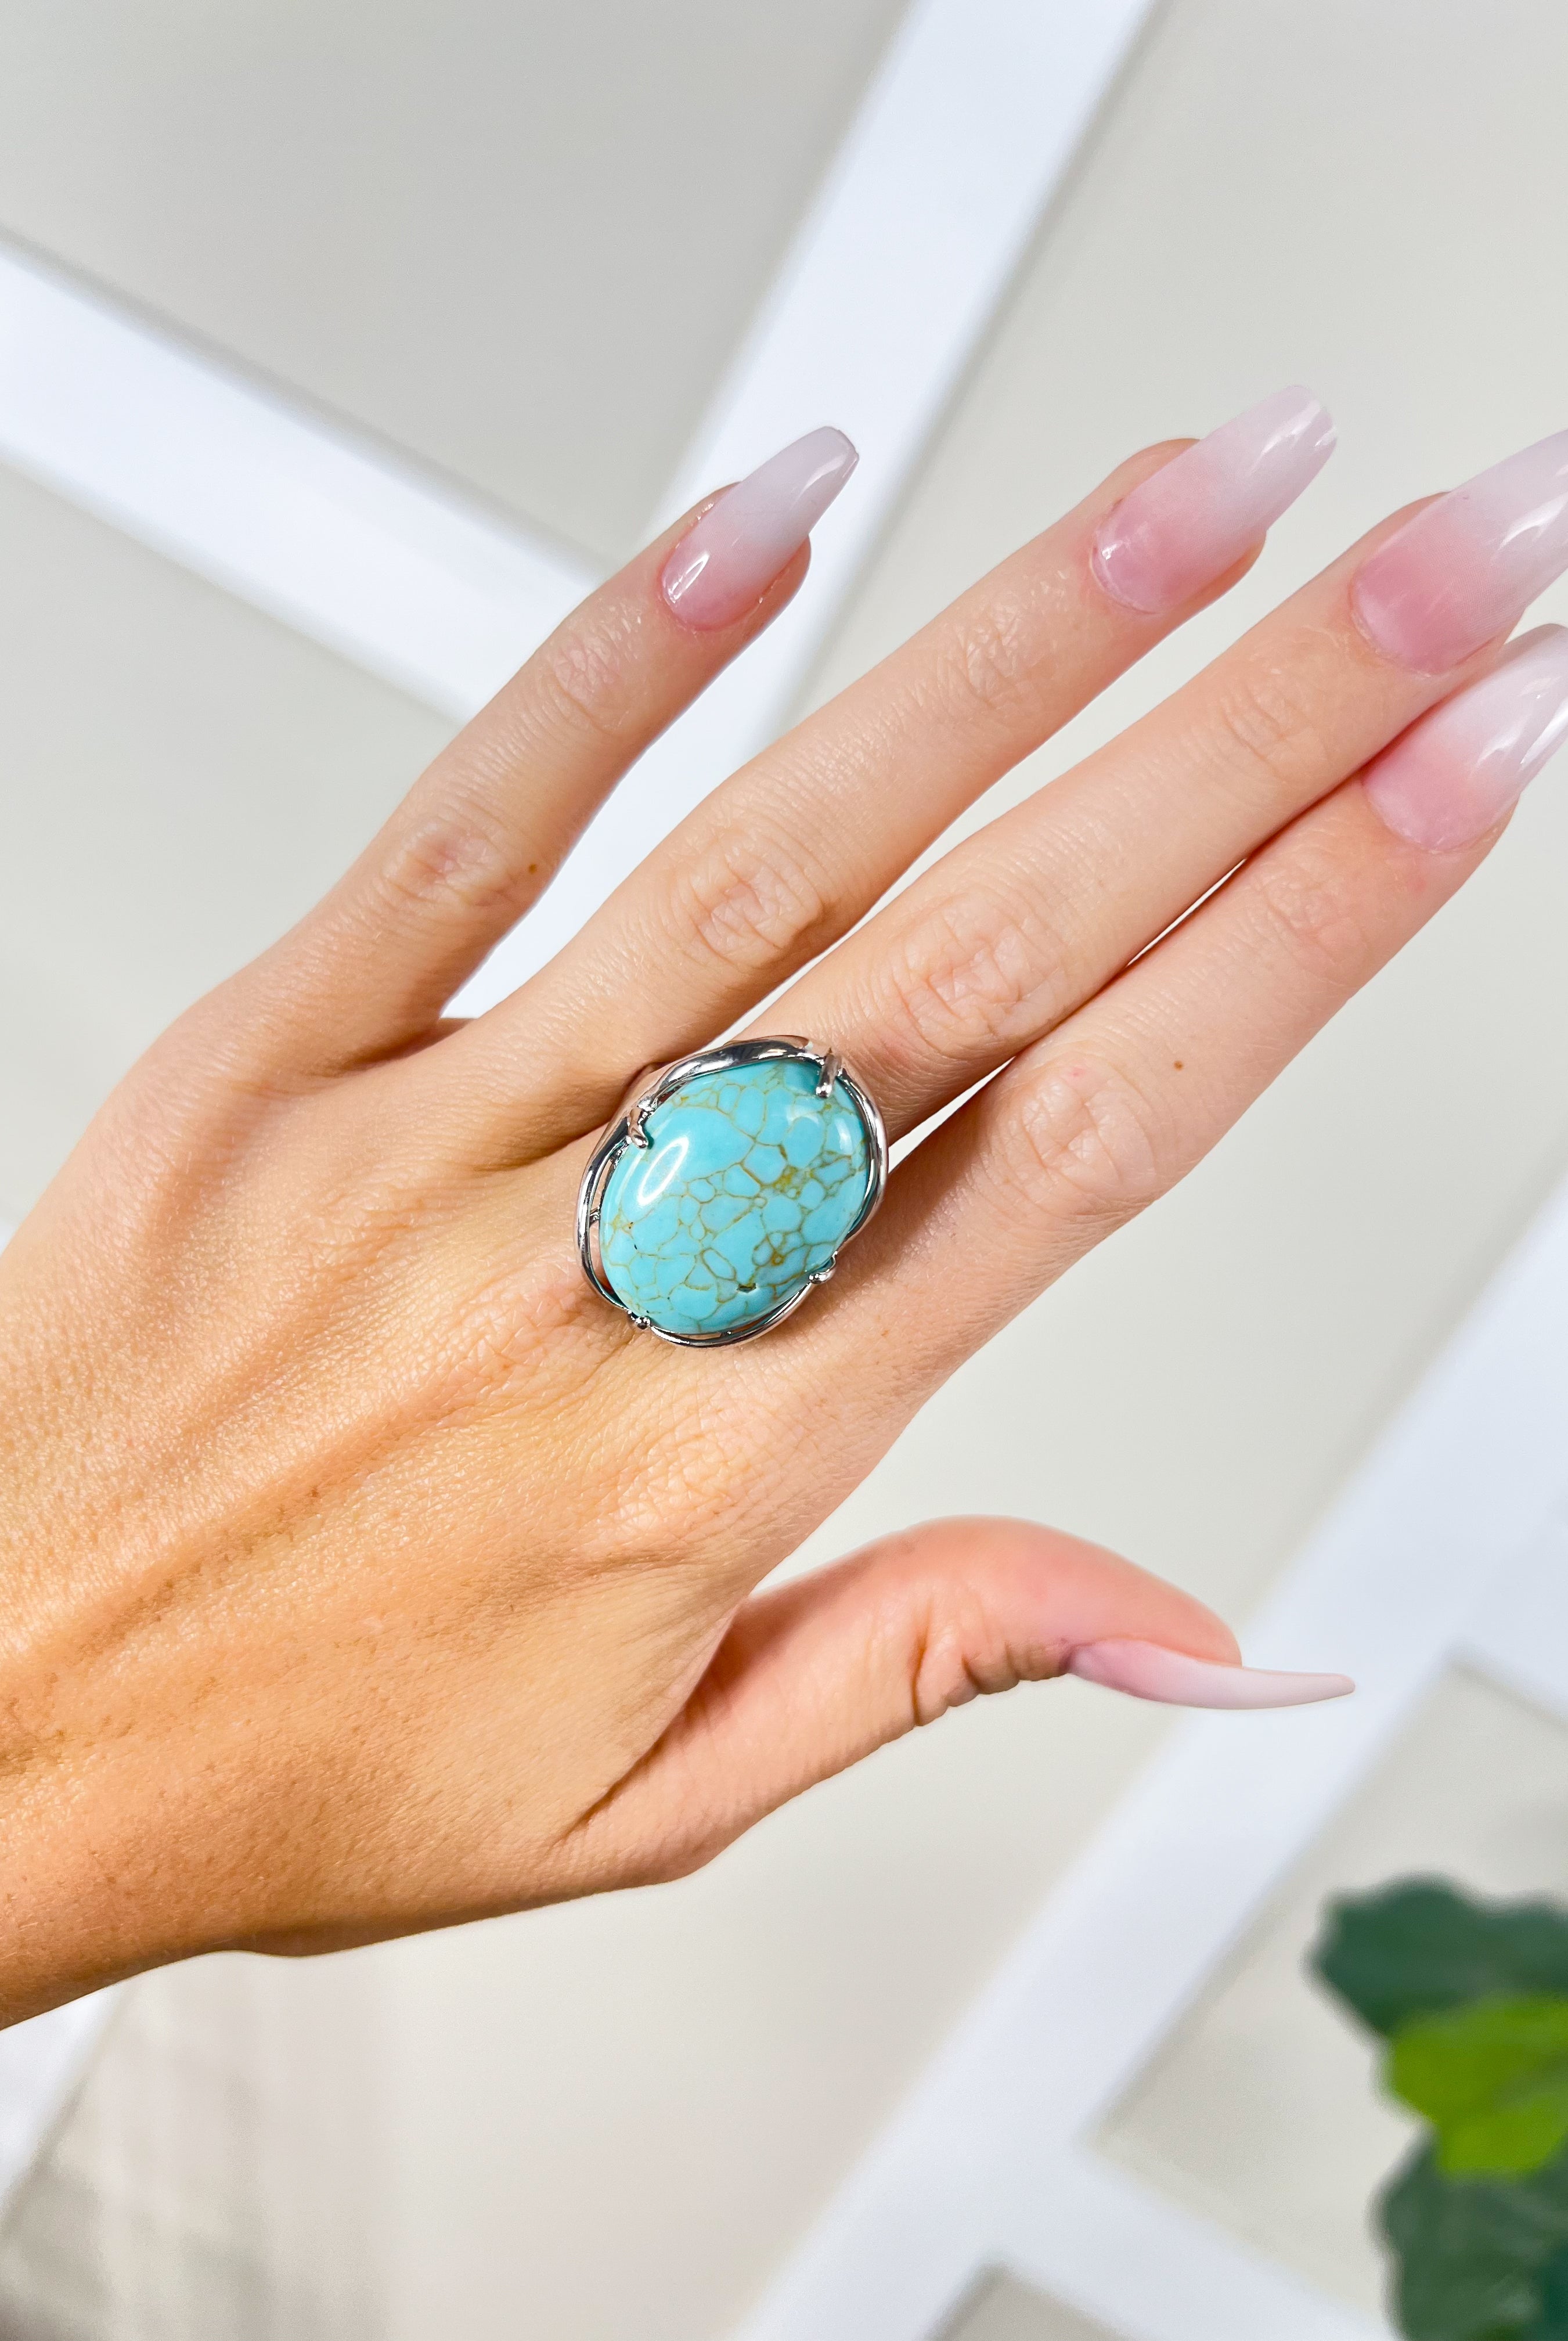 Large Gemstone RIng-310 Jewelry-Bridge Connections-Heathered Boho Boutique, Women's Fashion and Accessories in Palmetto, FL